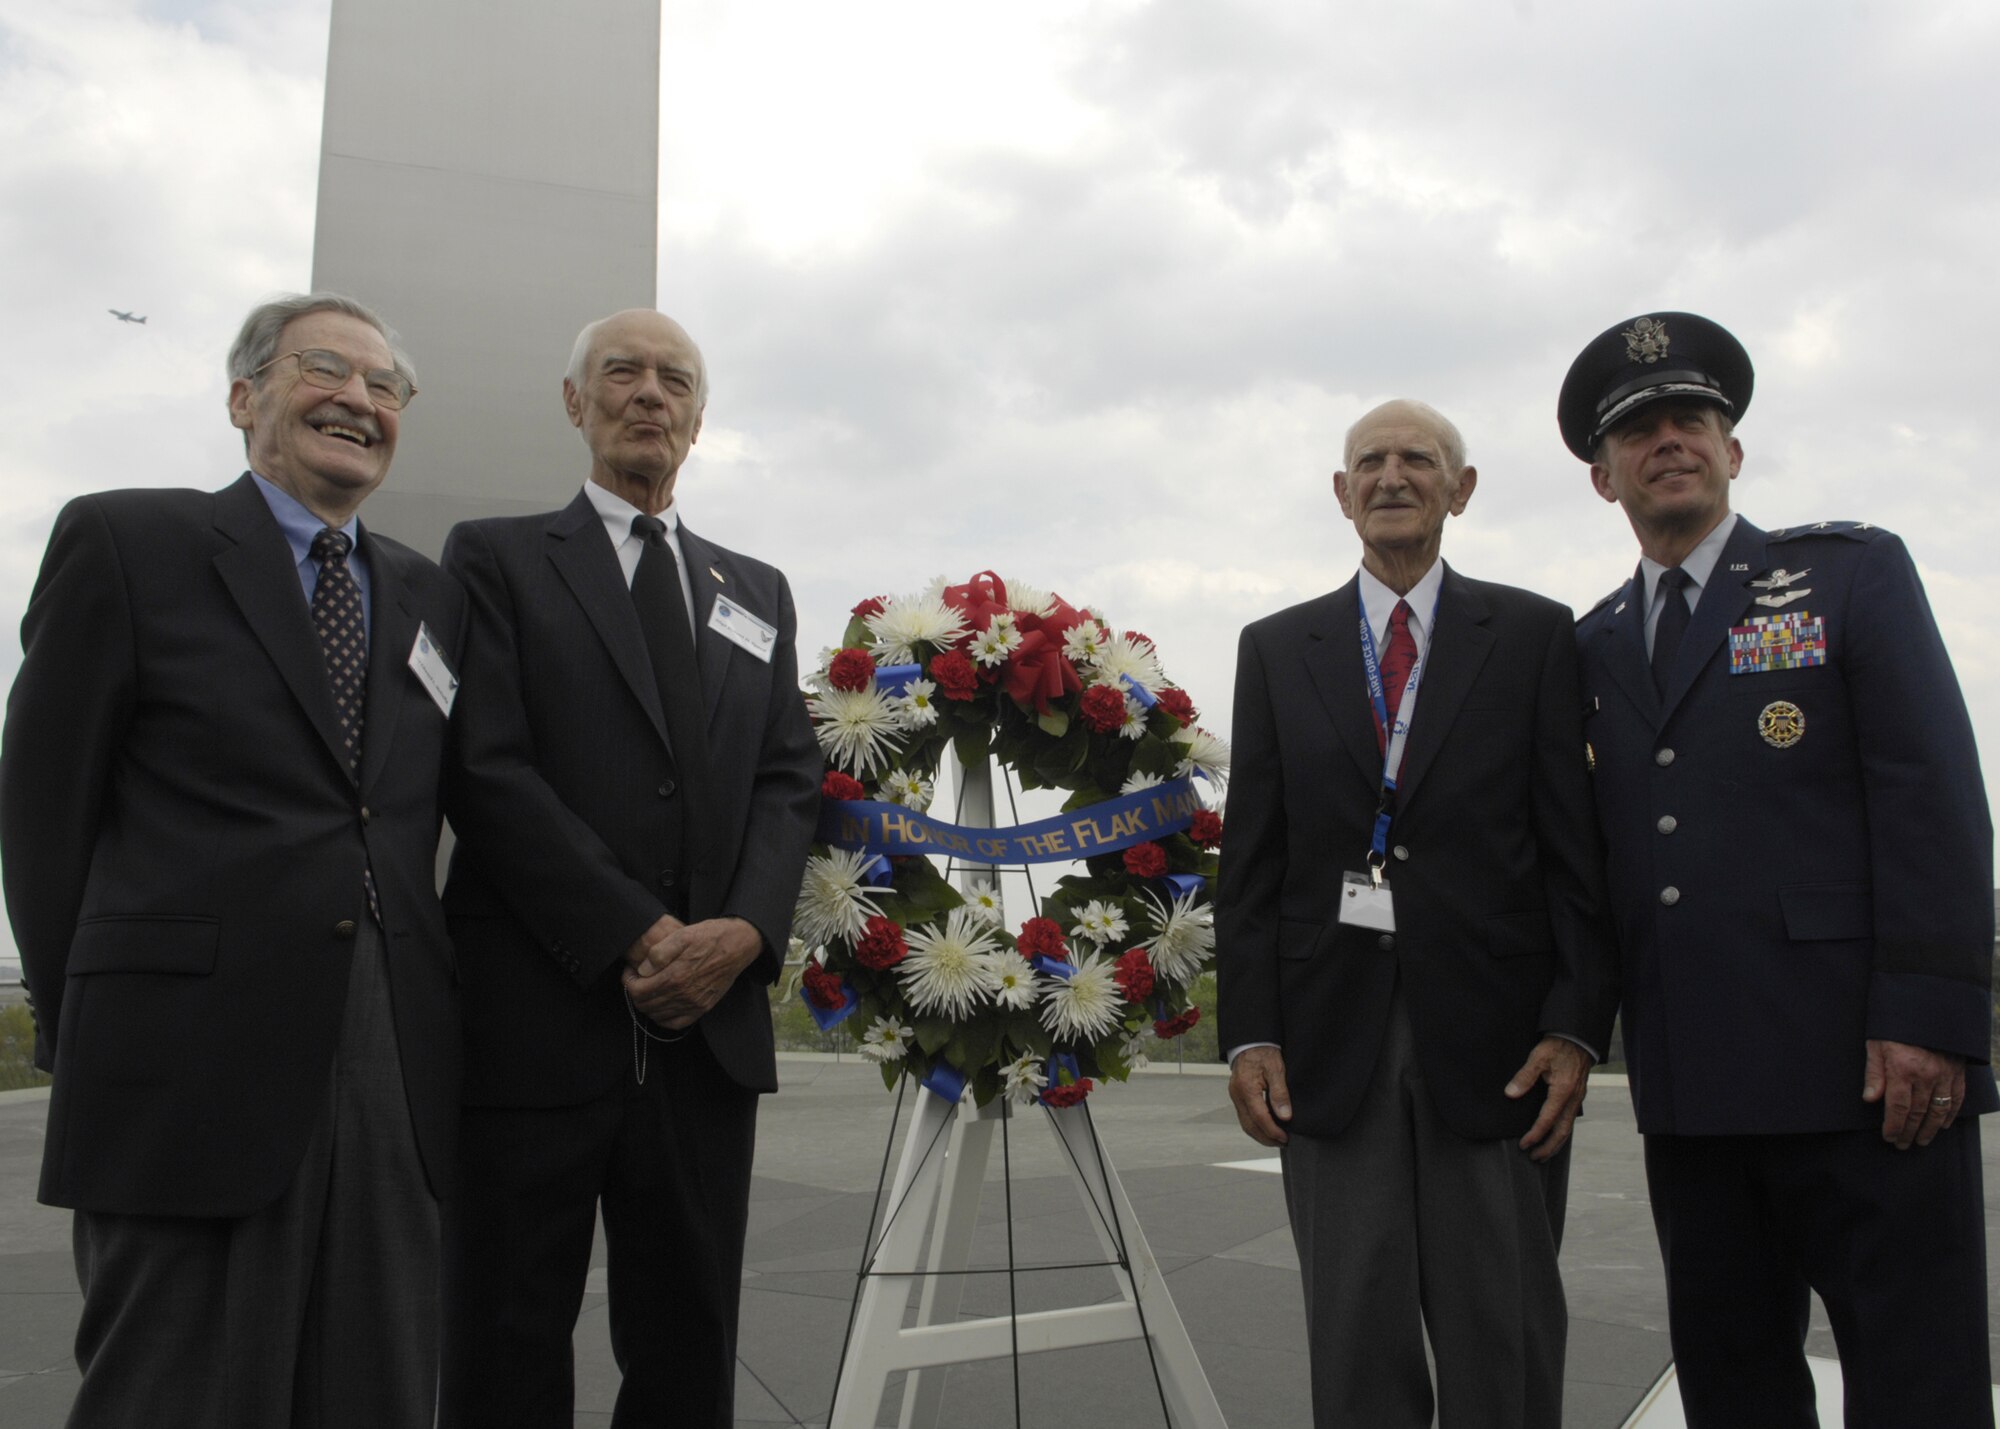 Maj. Gen. Robert L. Smolen, Air Force District of Washington commander, hosts the Air Force Wreath Laying Ceremony in honor of the Flak Man crew at the Air Force Memorial, Arlington, Va., April 24. The wreath was placed by Edward McNally, the Bombardier of the B-24 Bomber, The Flak Man, in honor of the former crew members of the Flak Man who dedicated their lives to the cause of freedom. (U.S. Air Force photo by Senior Airman Rusti Caraker)  